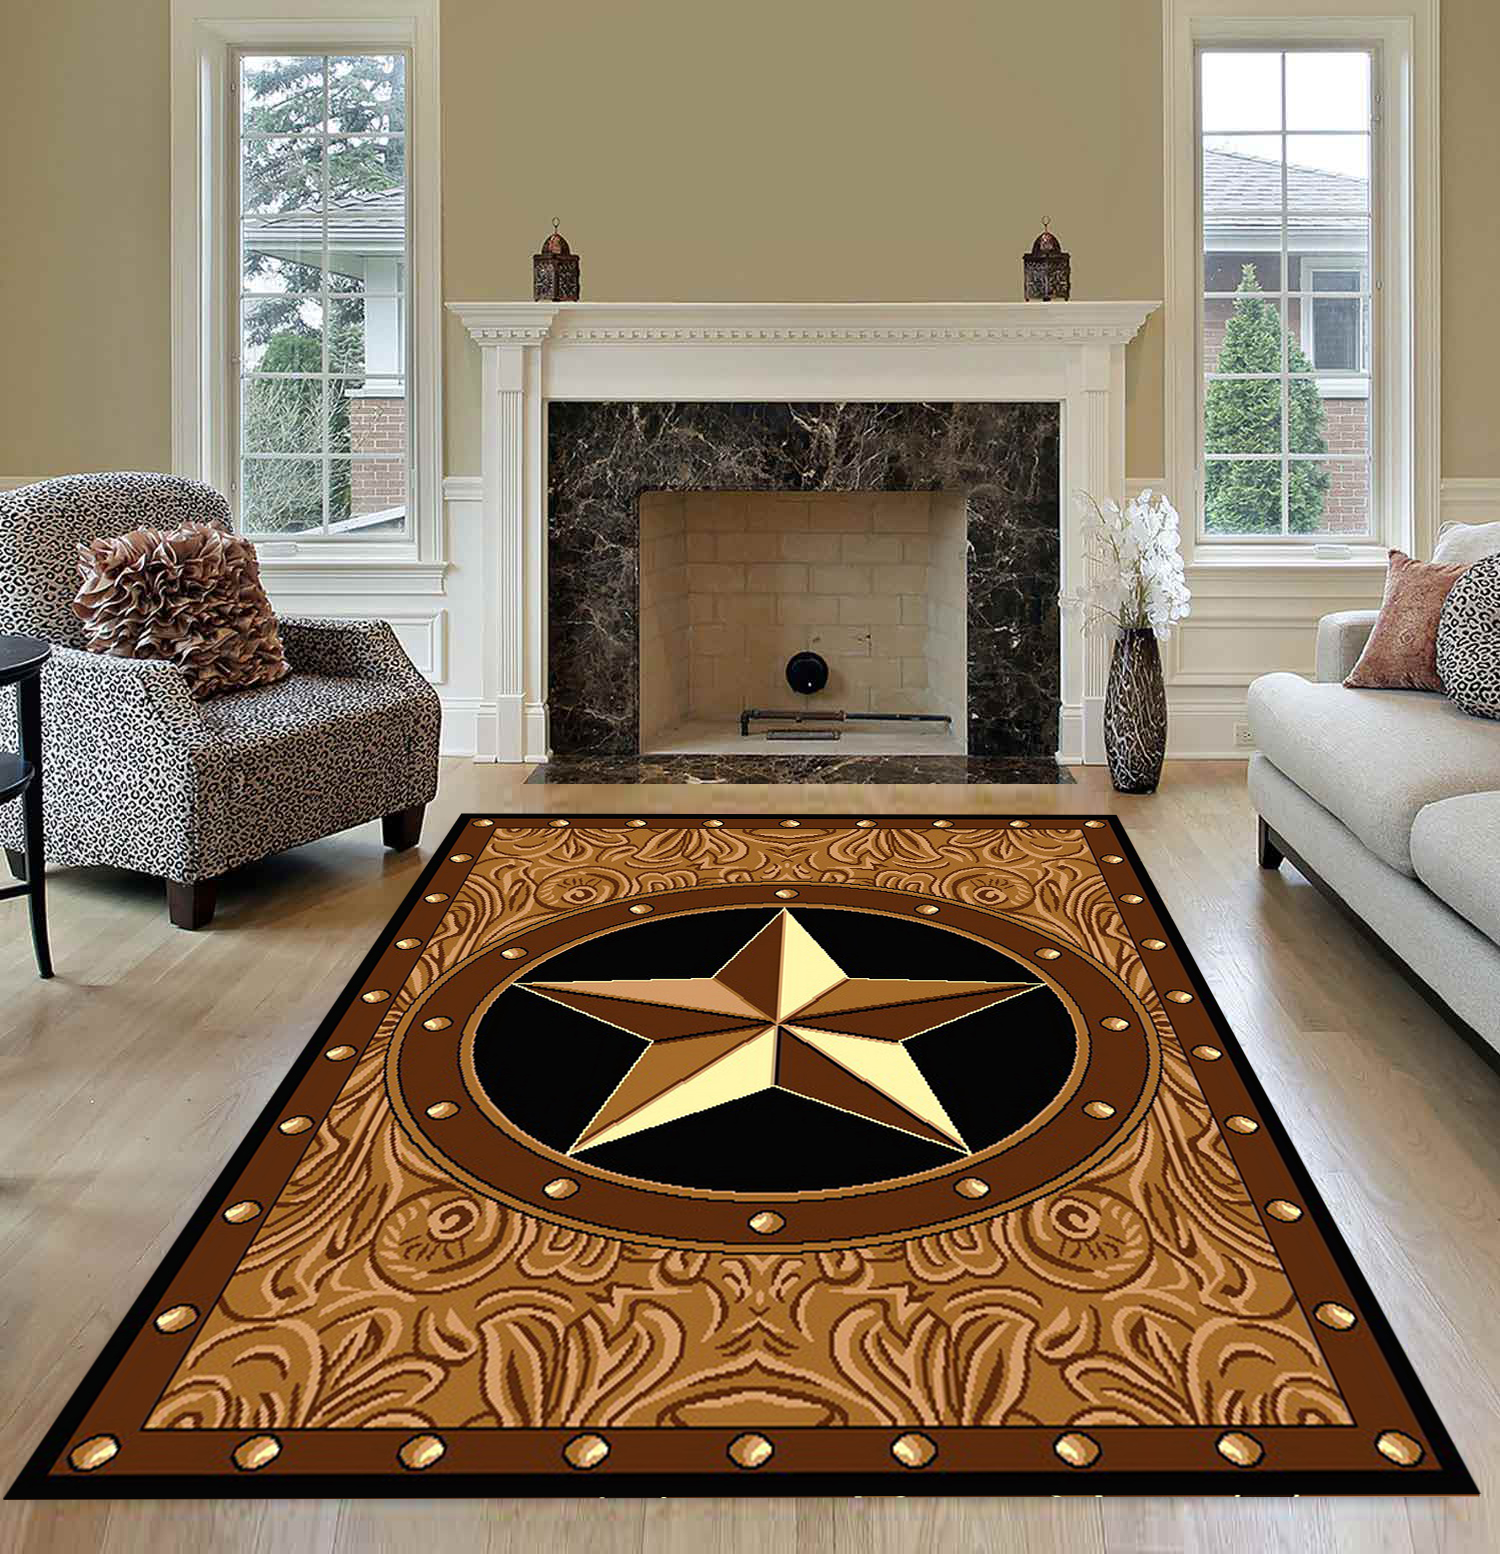 area rug for flooring by rugsmart in dallas texas-X5 collection